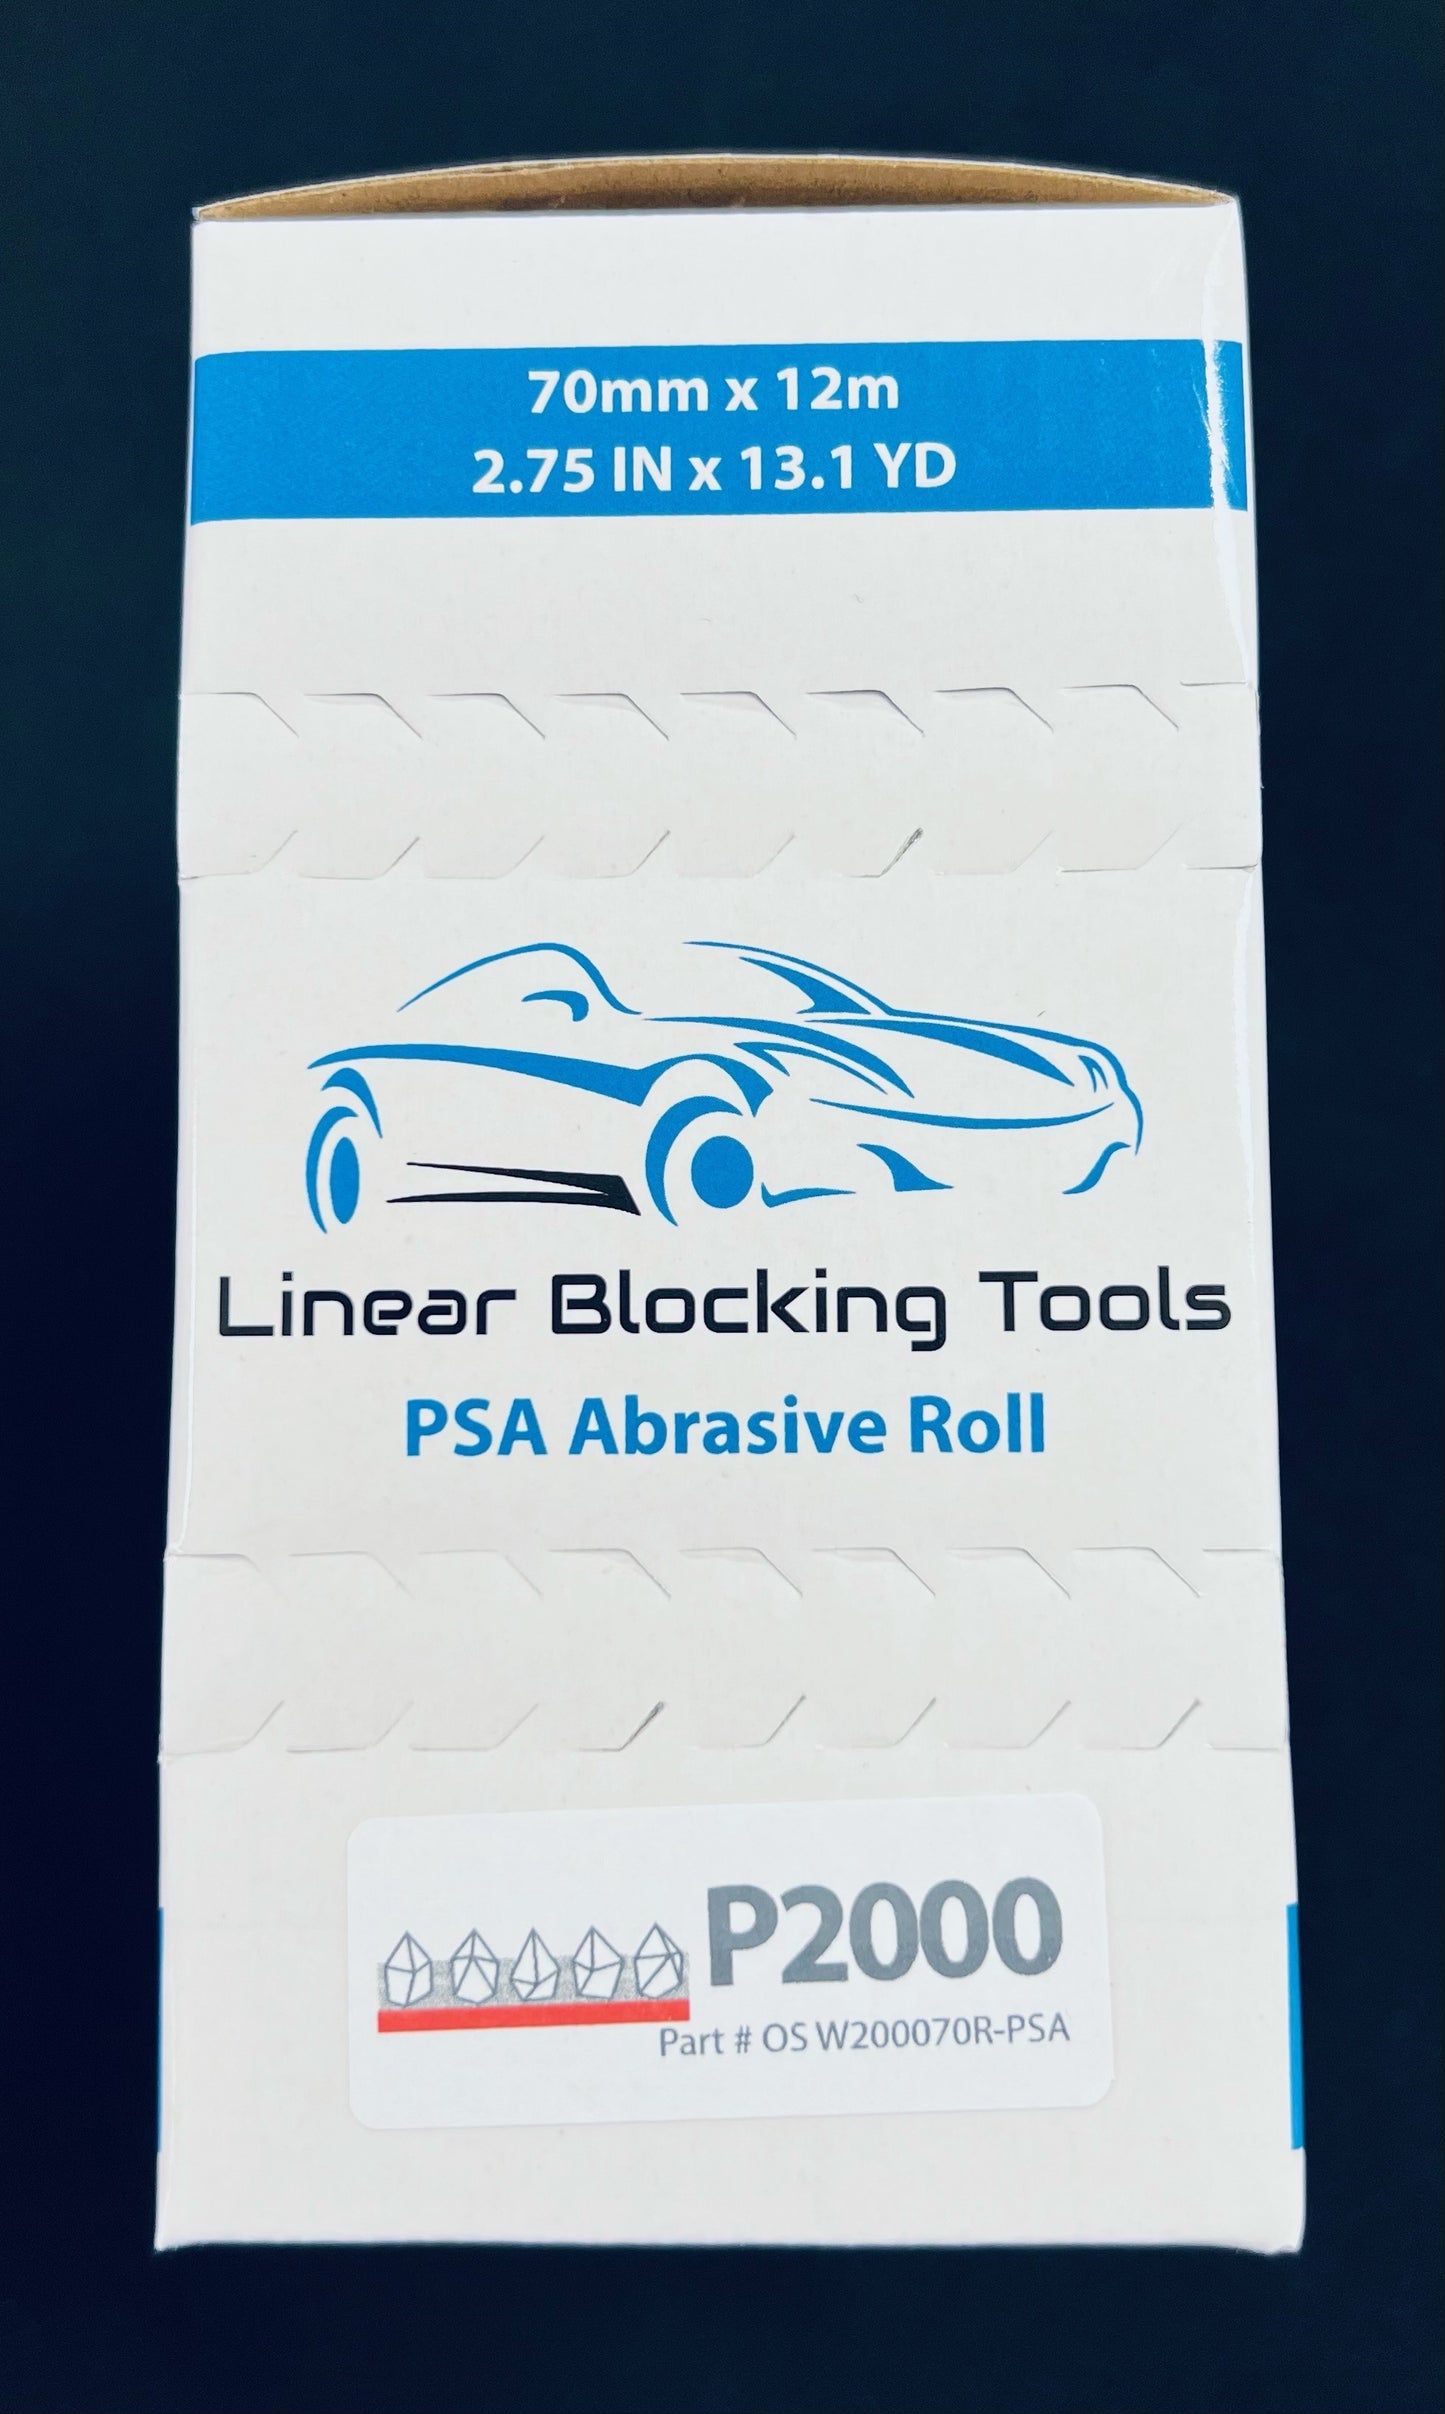 Linear Blocking Tools Wet Sandpaper 2000G (STICKY BACKED)